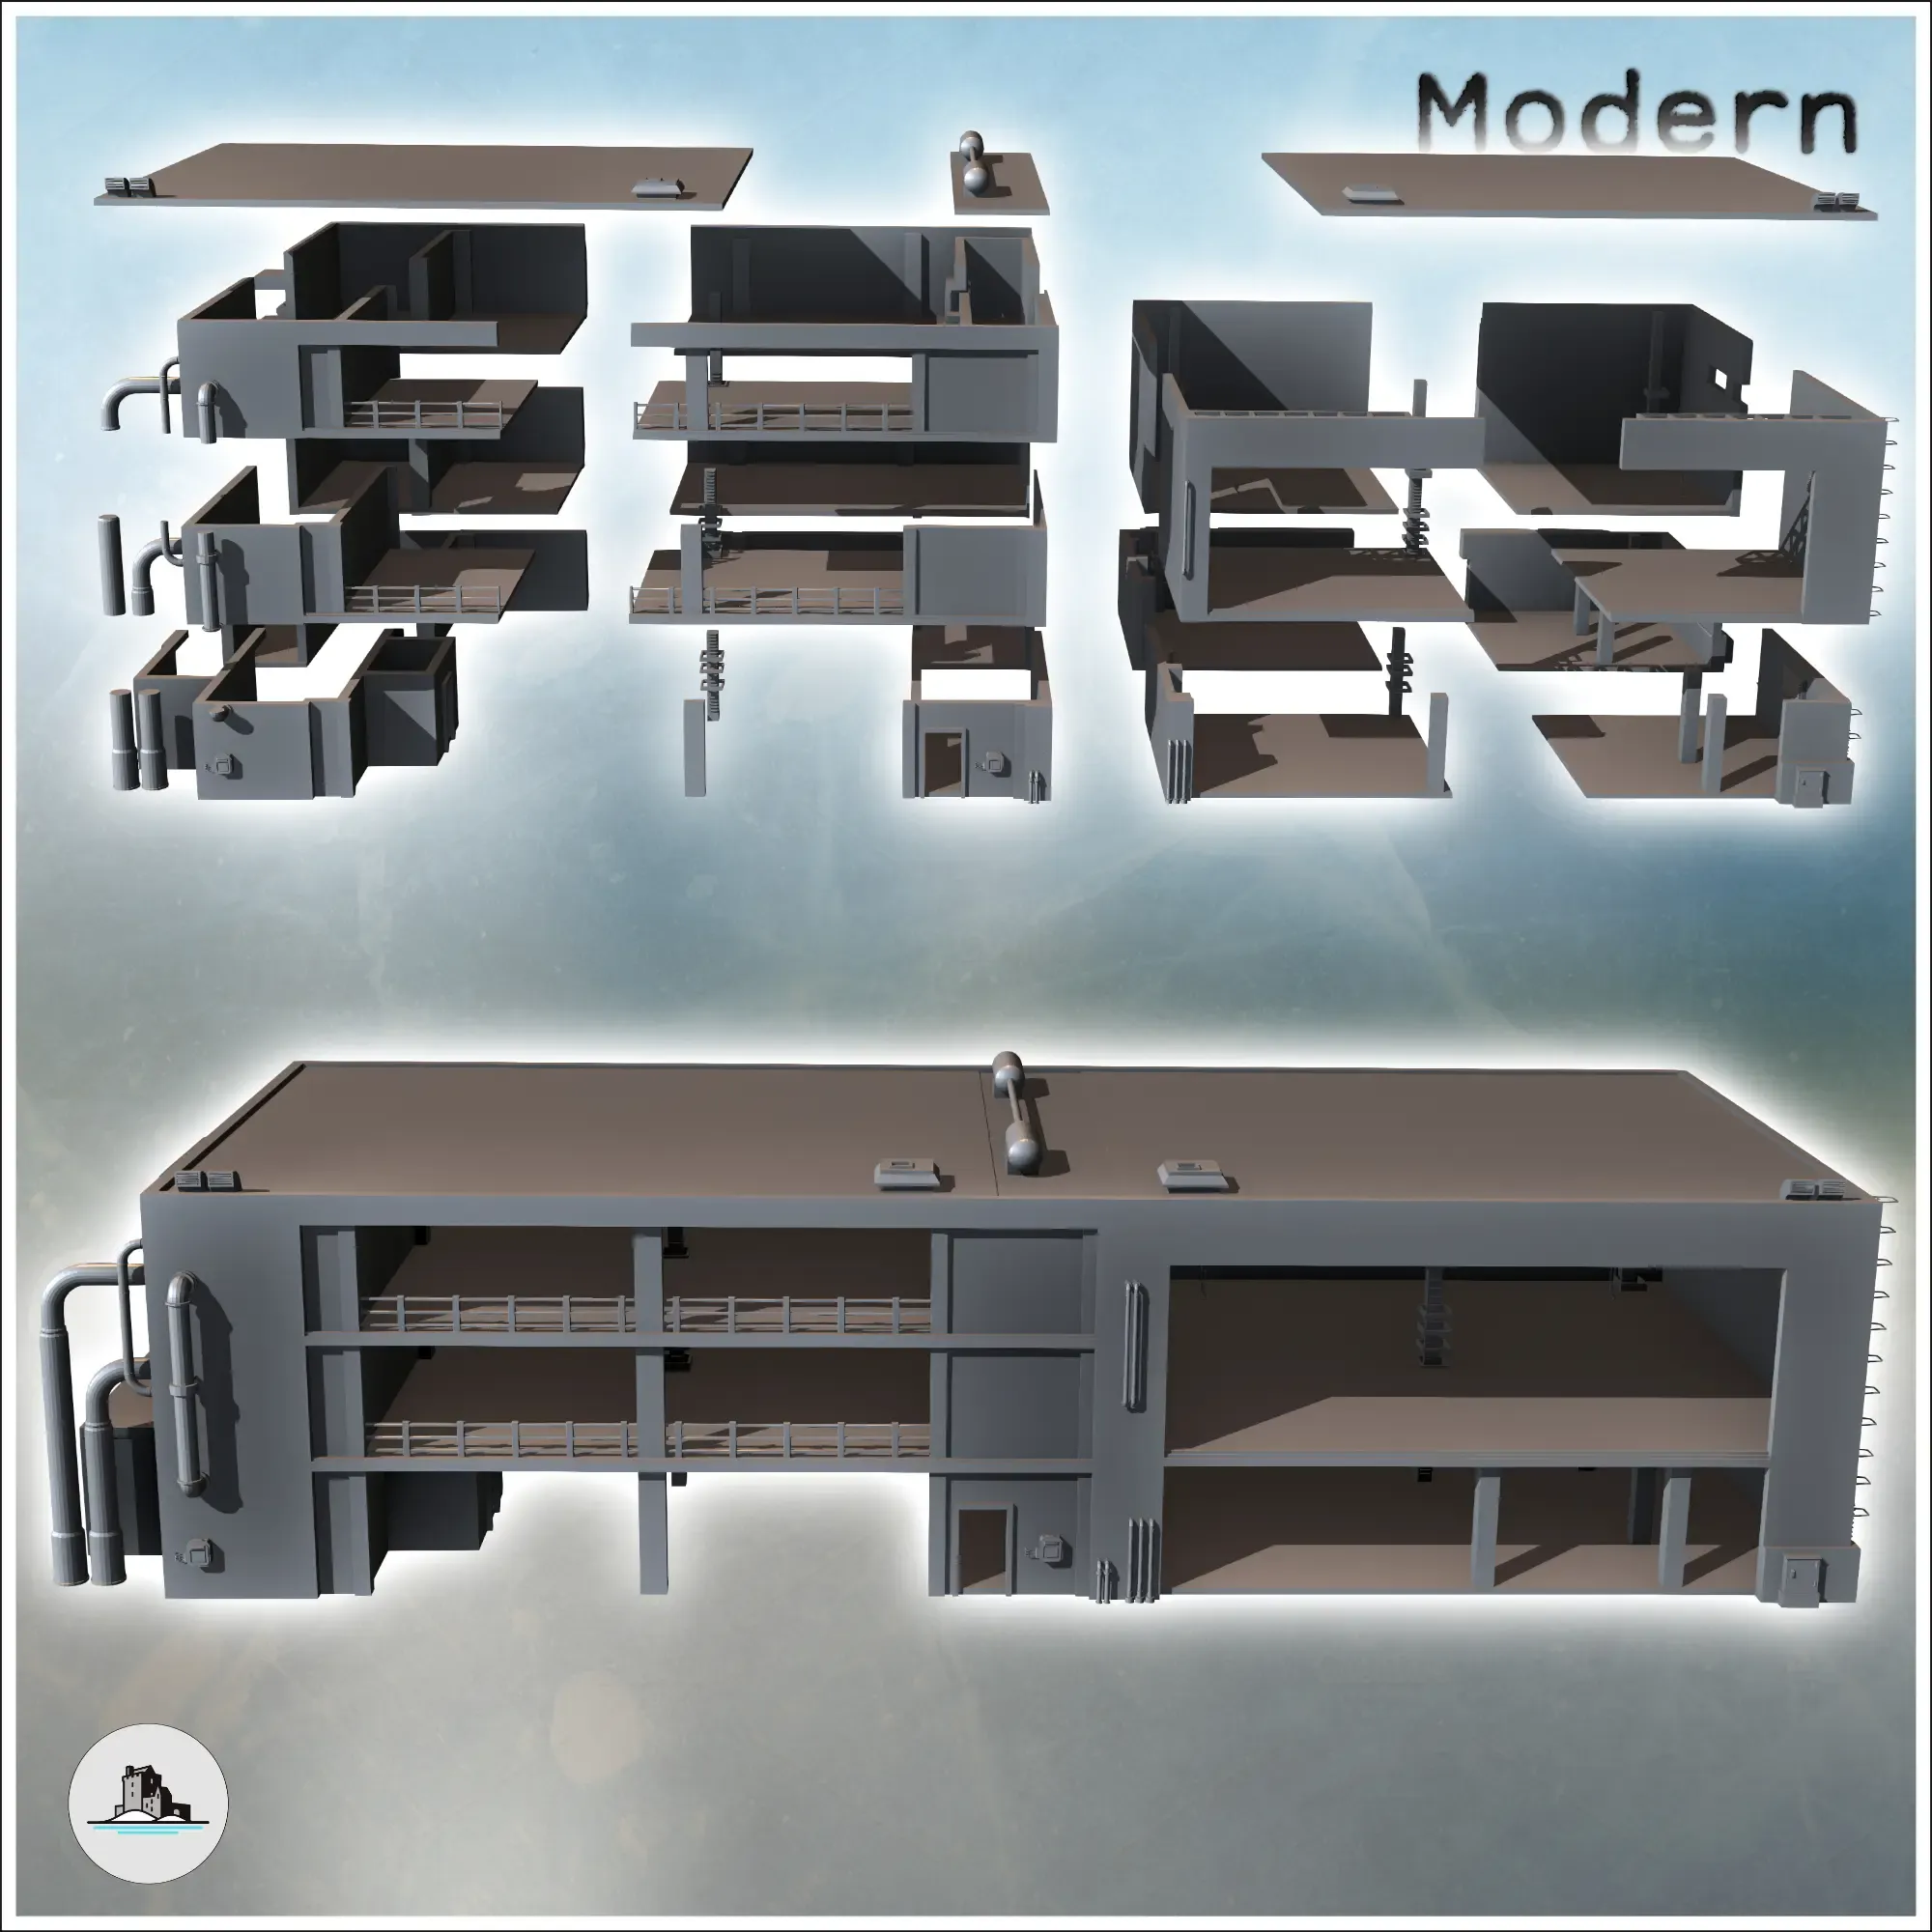 Open modern industrial building with multiple floors, flat r